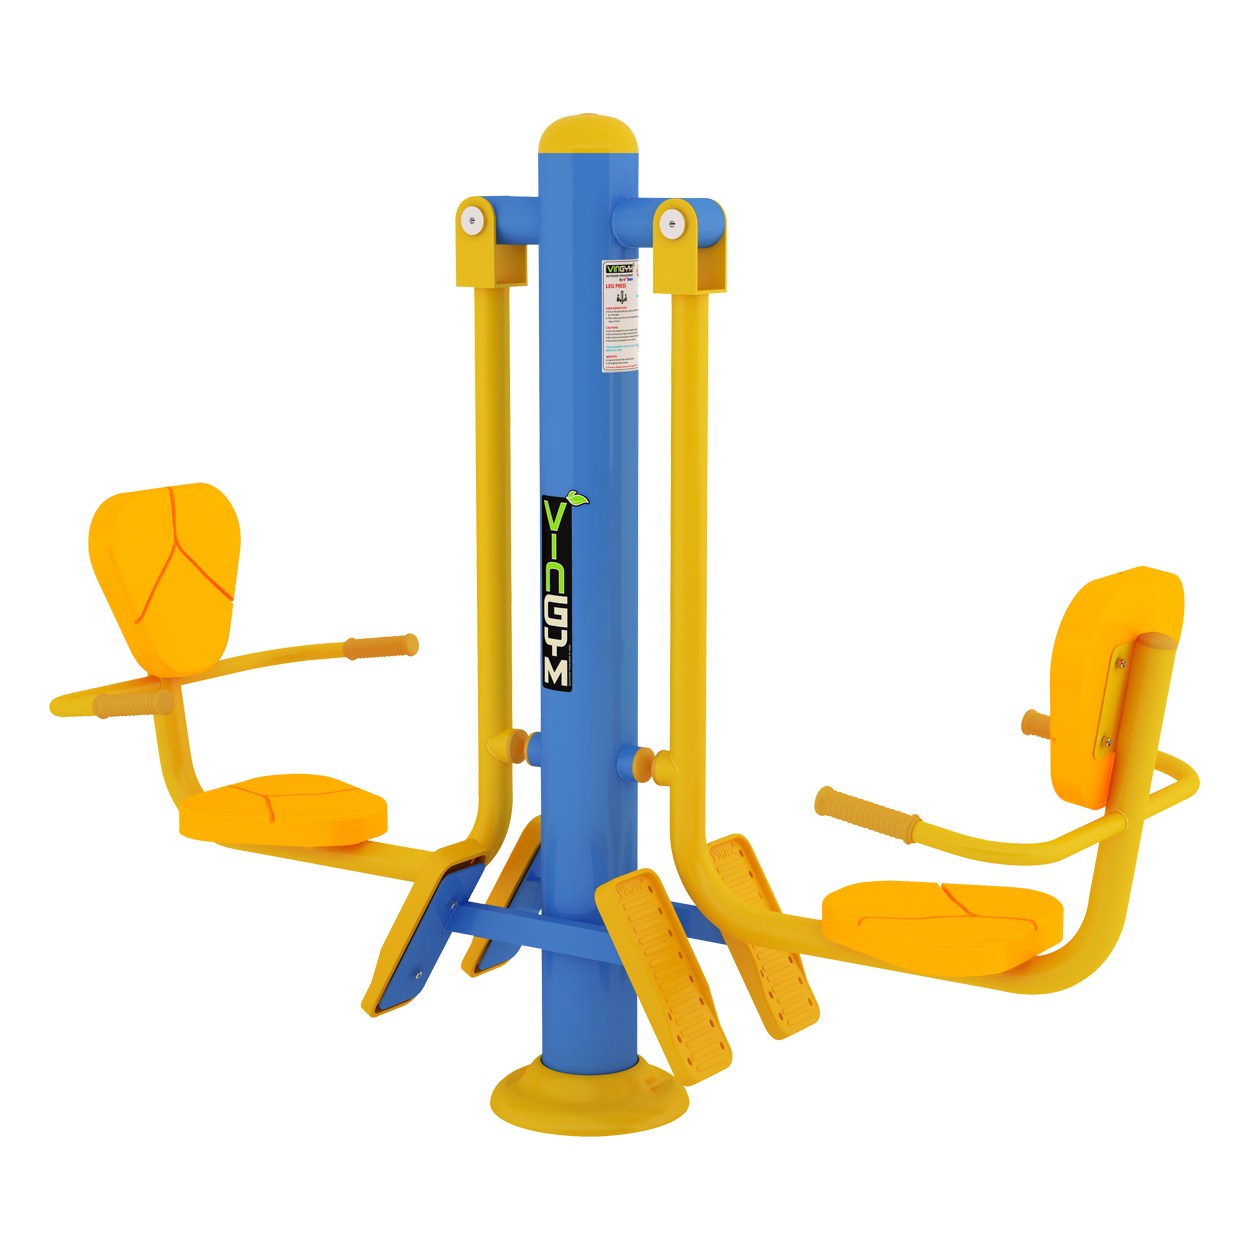 Outdoor Gym Equipment Manufacturers Open Gym Machines in India